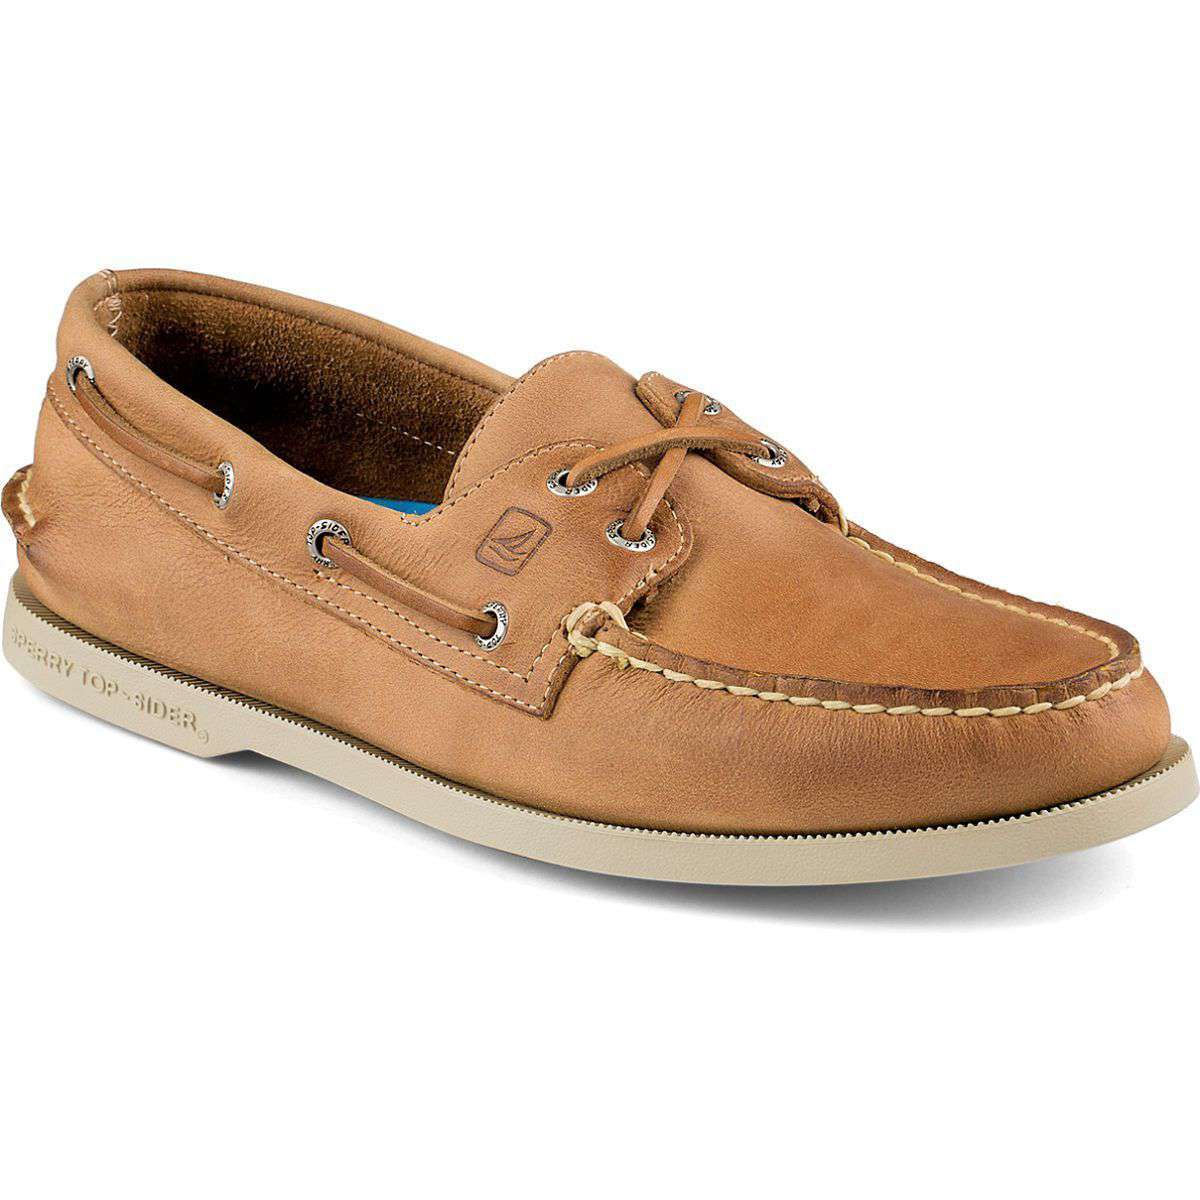 Men's Authentic Original Cross Lace 2-Eye Boat Shoe in Tan by Sperry - Country Club Prep